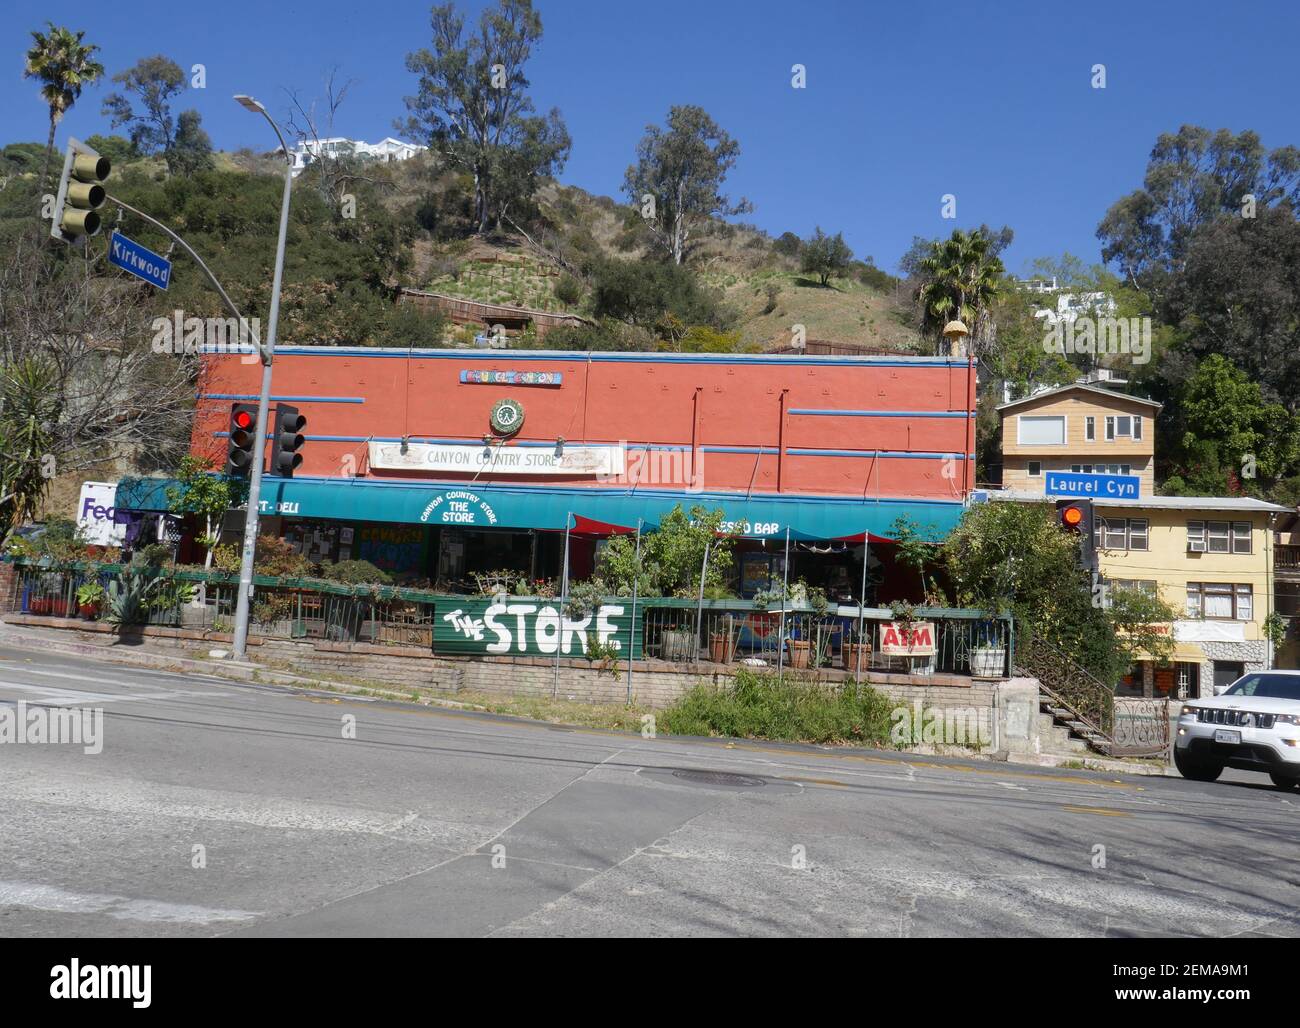 Los Angeles, California, USA 24th February 2021 A general view of atmosphere of Laurel Canyon Canyon Country Store where Jim Morrison, Frank Zappa, Joni Mitchell, had jam sessions on the patio at 2108 Laurel Canyon Blvd on February 24, 2021 Los Angeles, California, USA. Photo by Barry King/Alamy Stock Photo Stock Photo